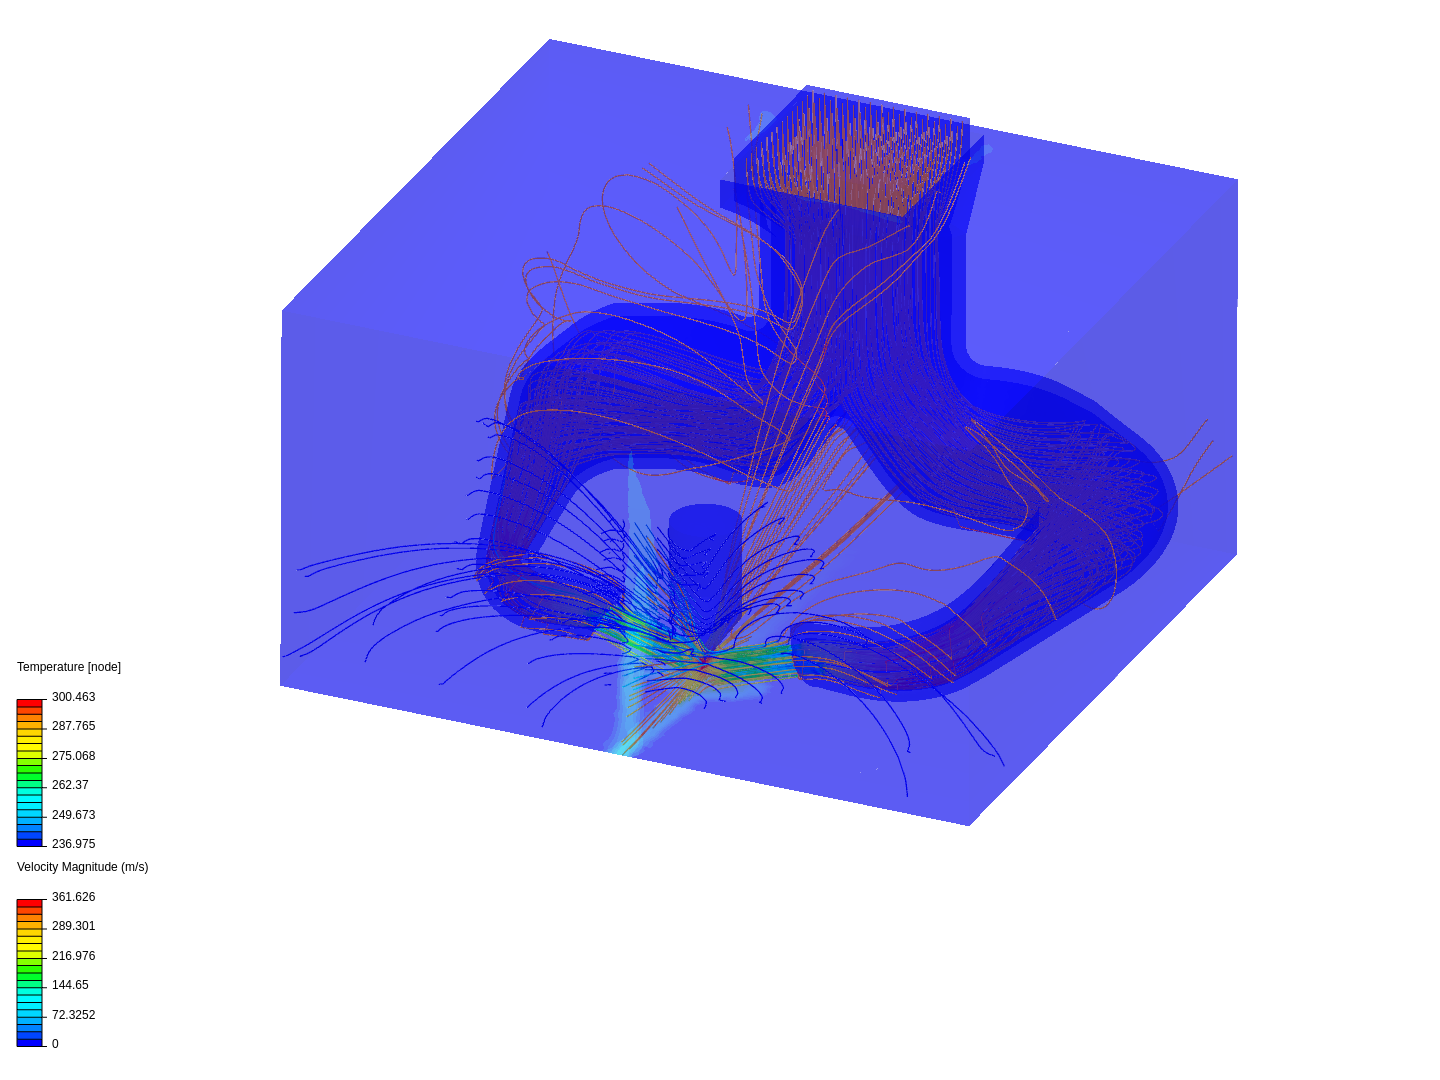 cfd_hotend image